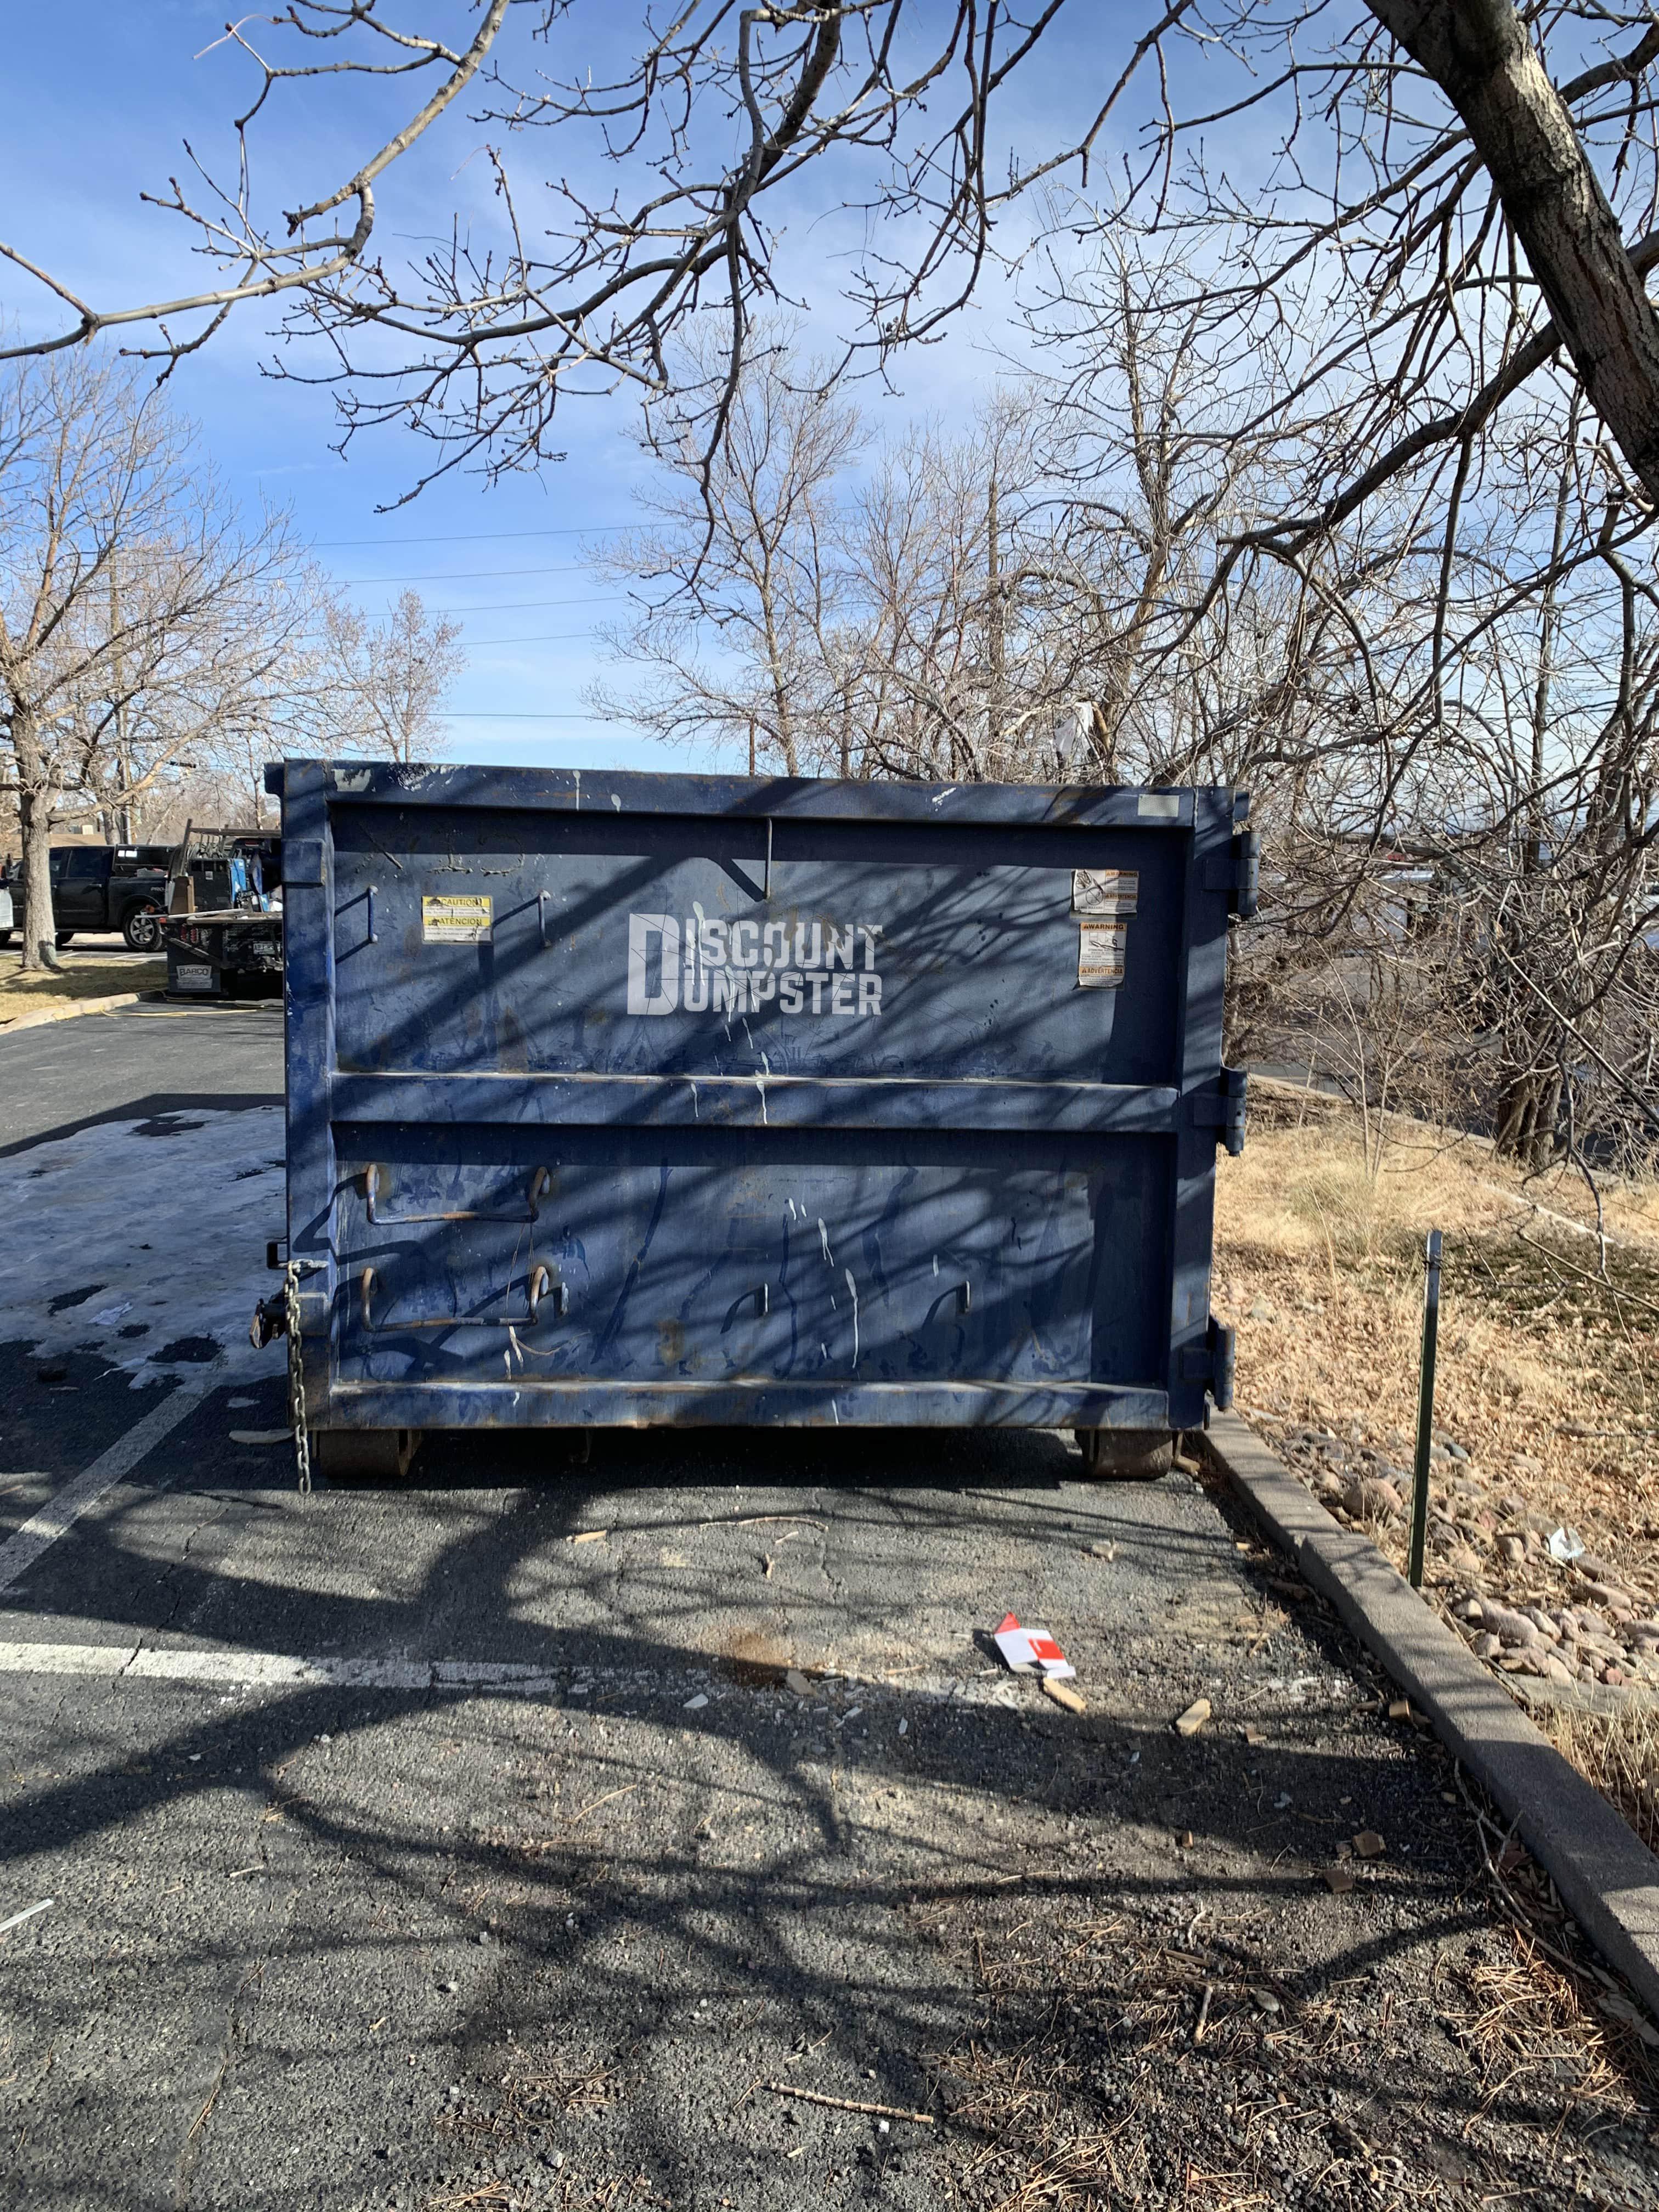 Discount dumpster has roll off dumpsters in Denver co